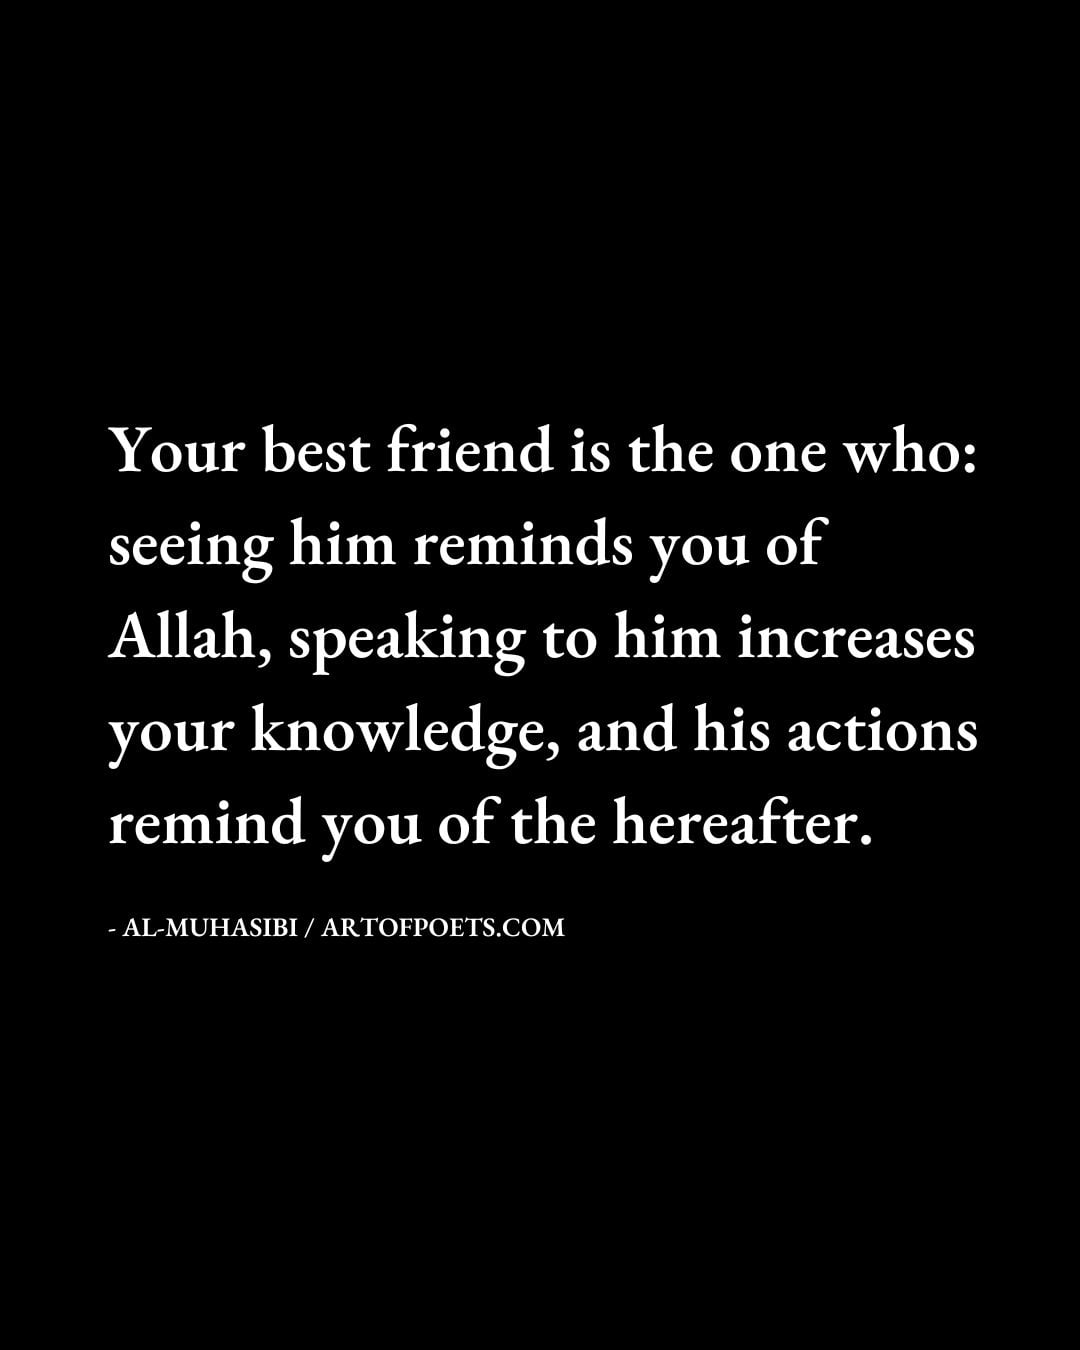 Your best friend is the one who seeing him reminds you of Allah speaking to him increases your knowledge and his actions remind you of the hereafter. Al Muhasibi